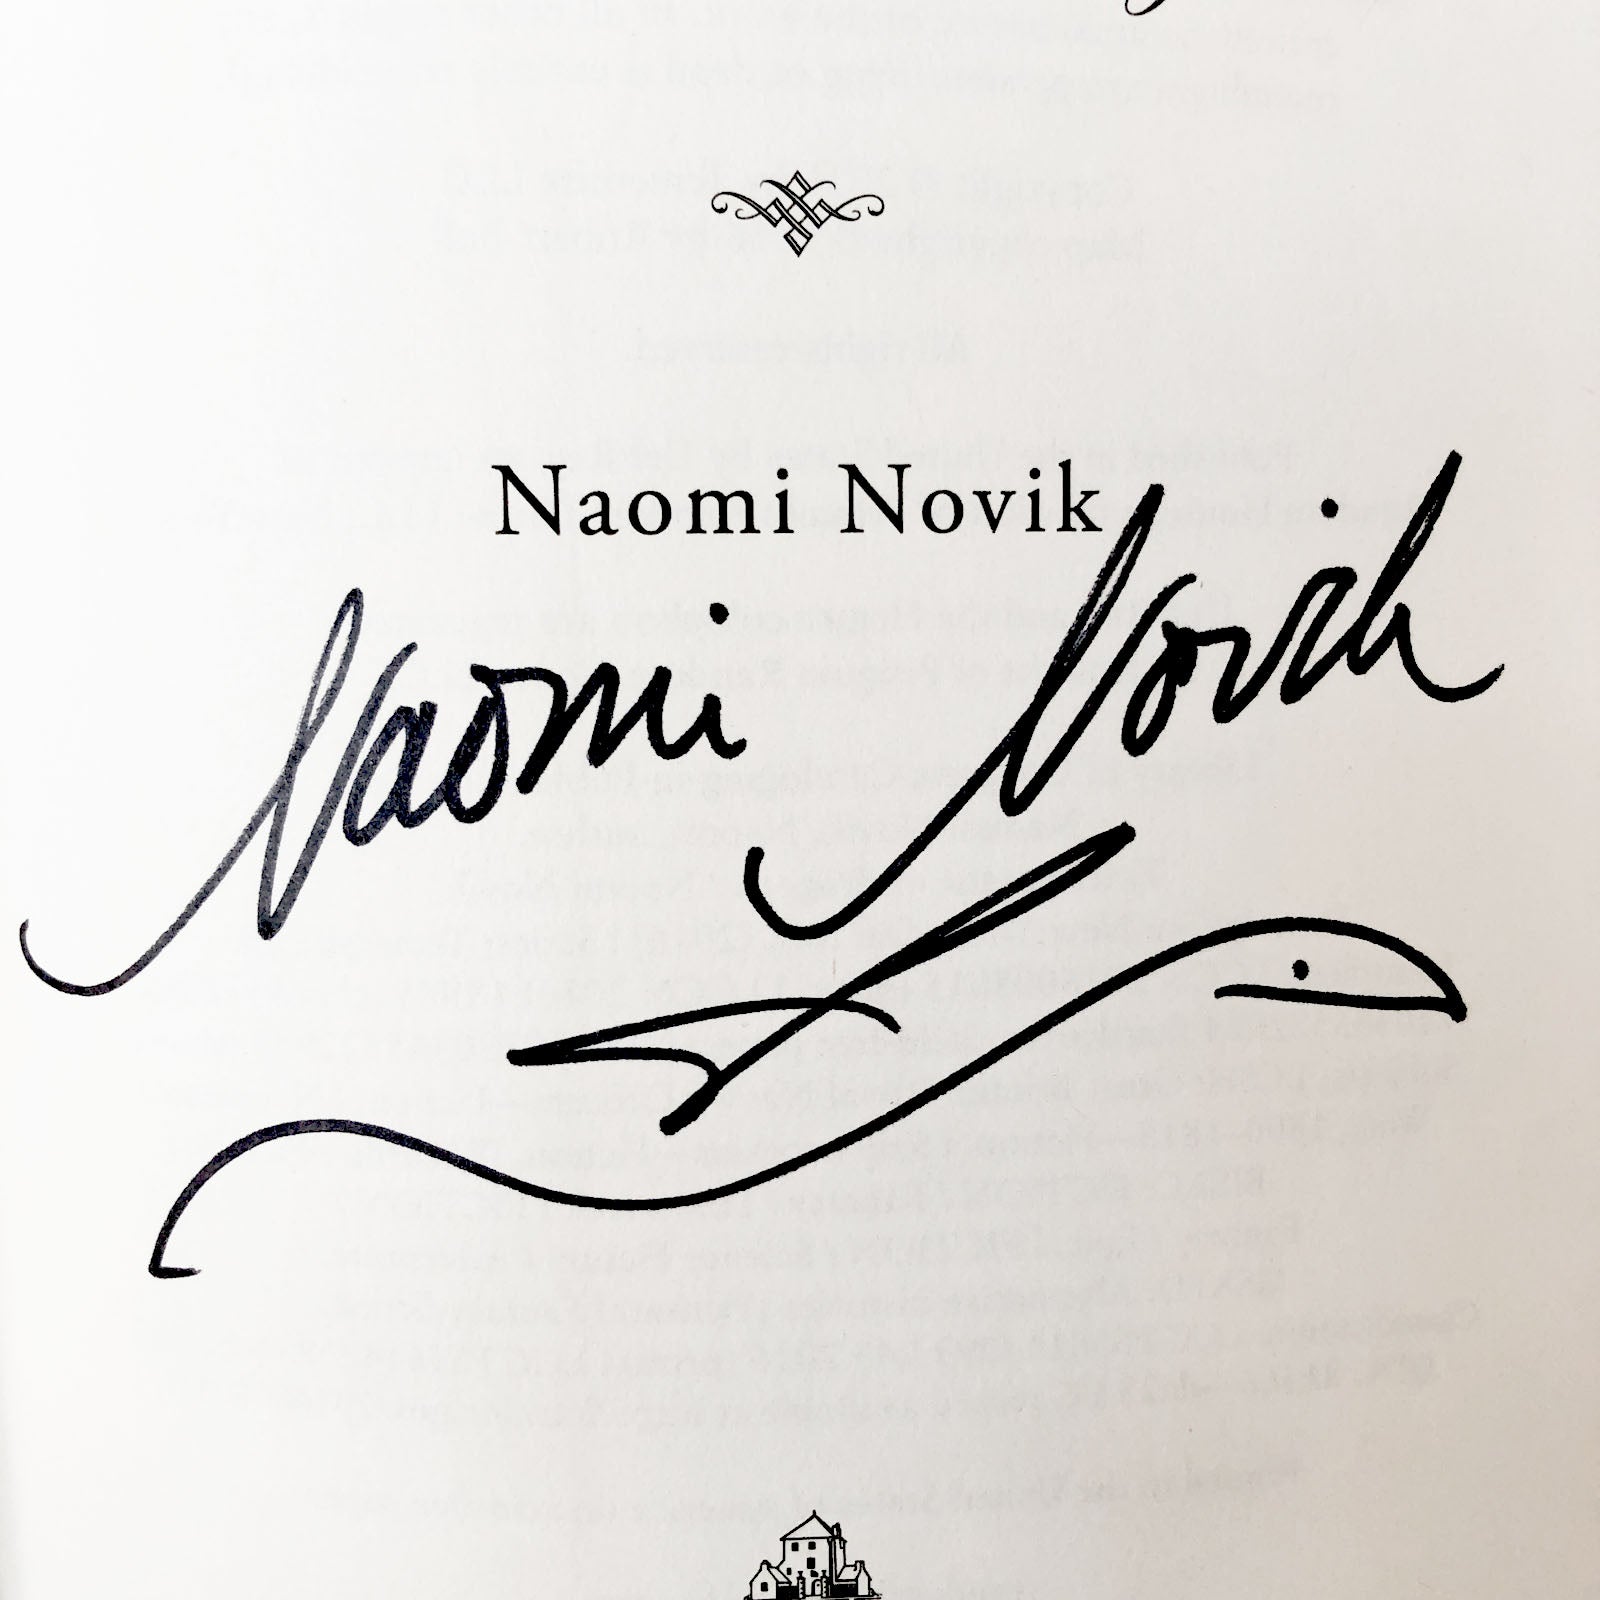 League of Dragons by Naomi Novik SIGNED! [FIRST EDITION / FIRST PRINTI